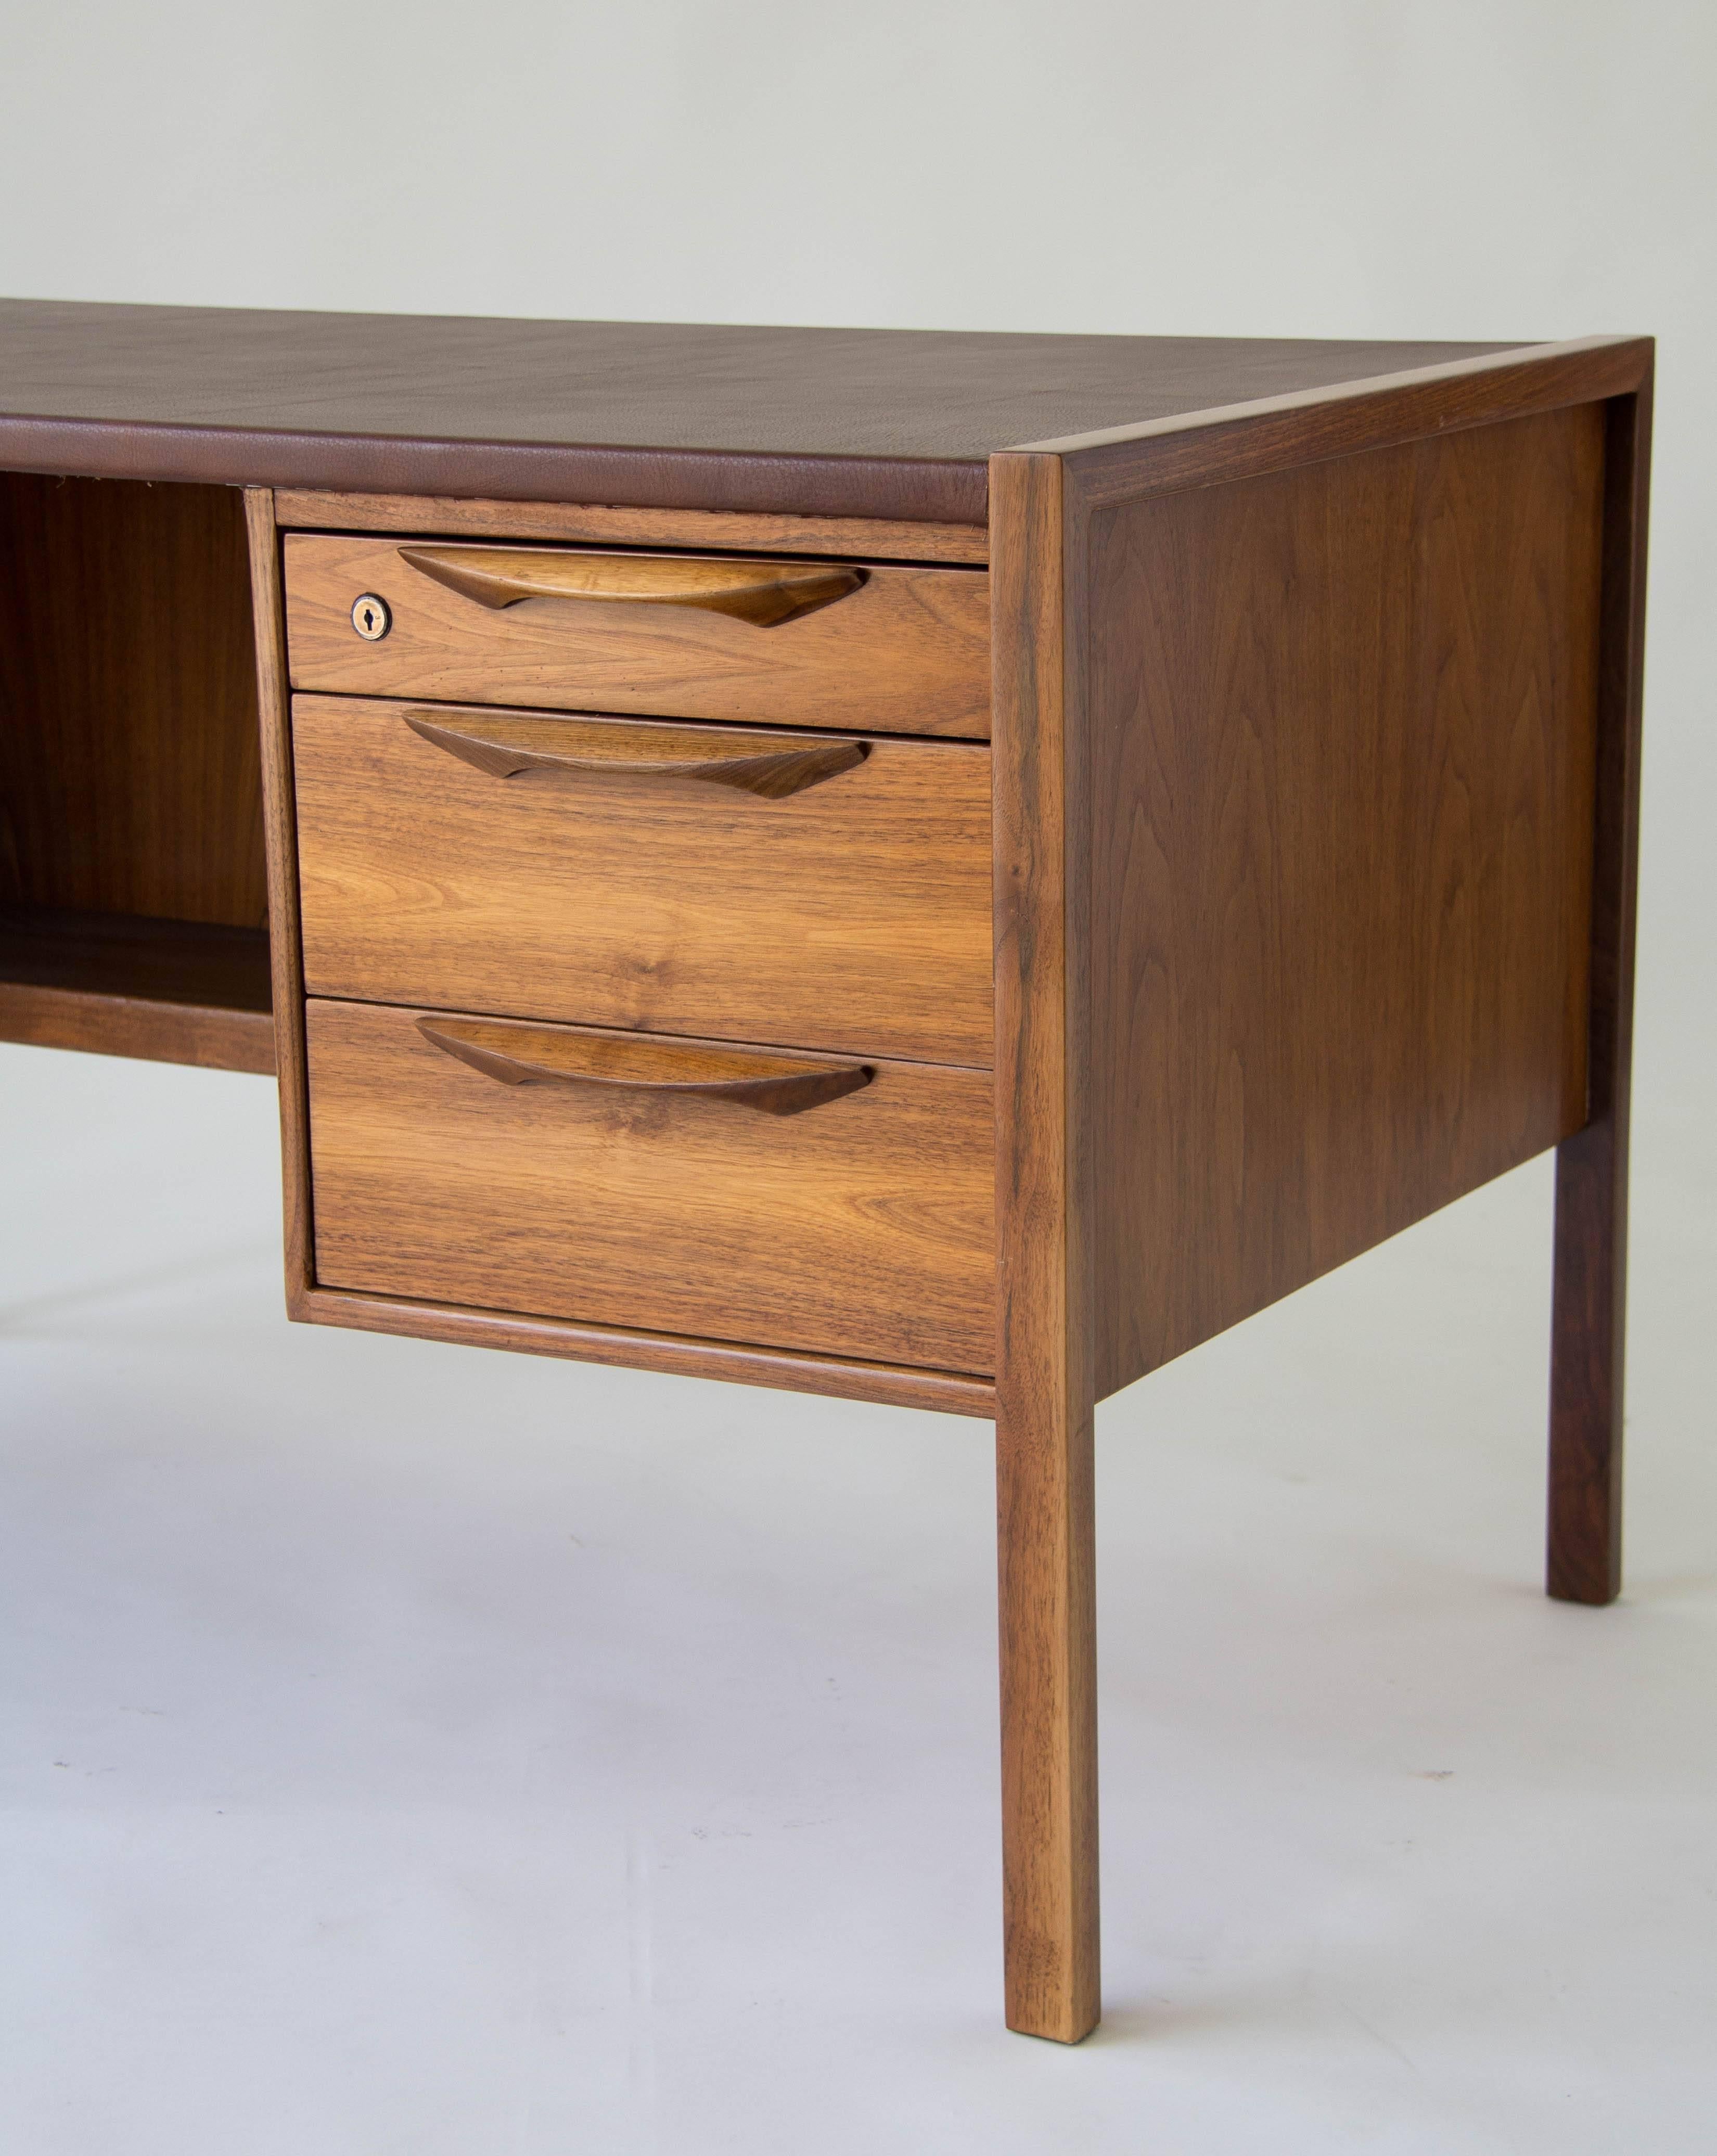 20th Century Jens Risom Walnut Desk with Leather Writing Surface